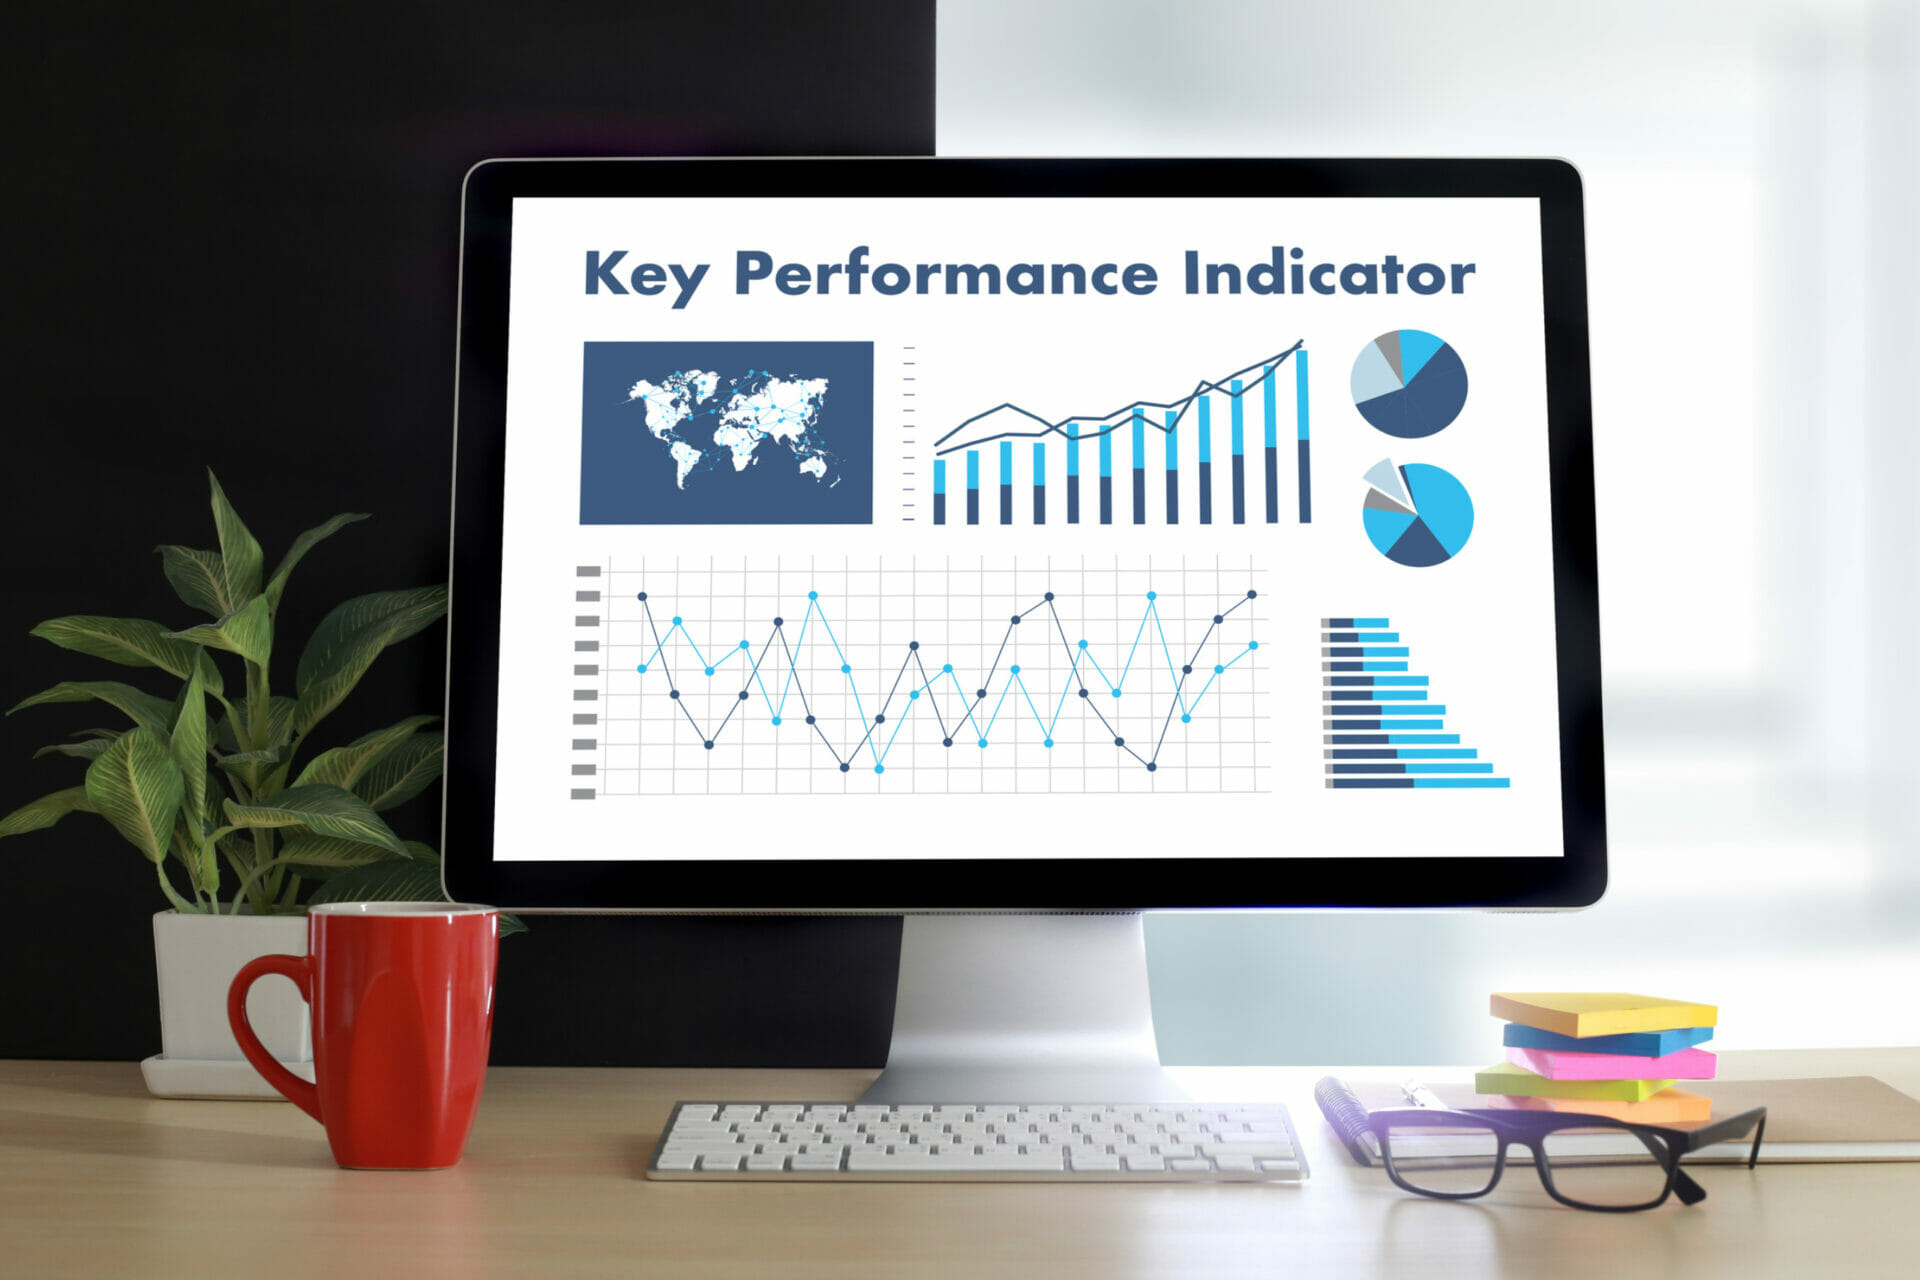 Discover the Key Performance Indicators (KPIs) that can lead your brand to make effective ad adjustments that increase sales on Amazon.